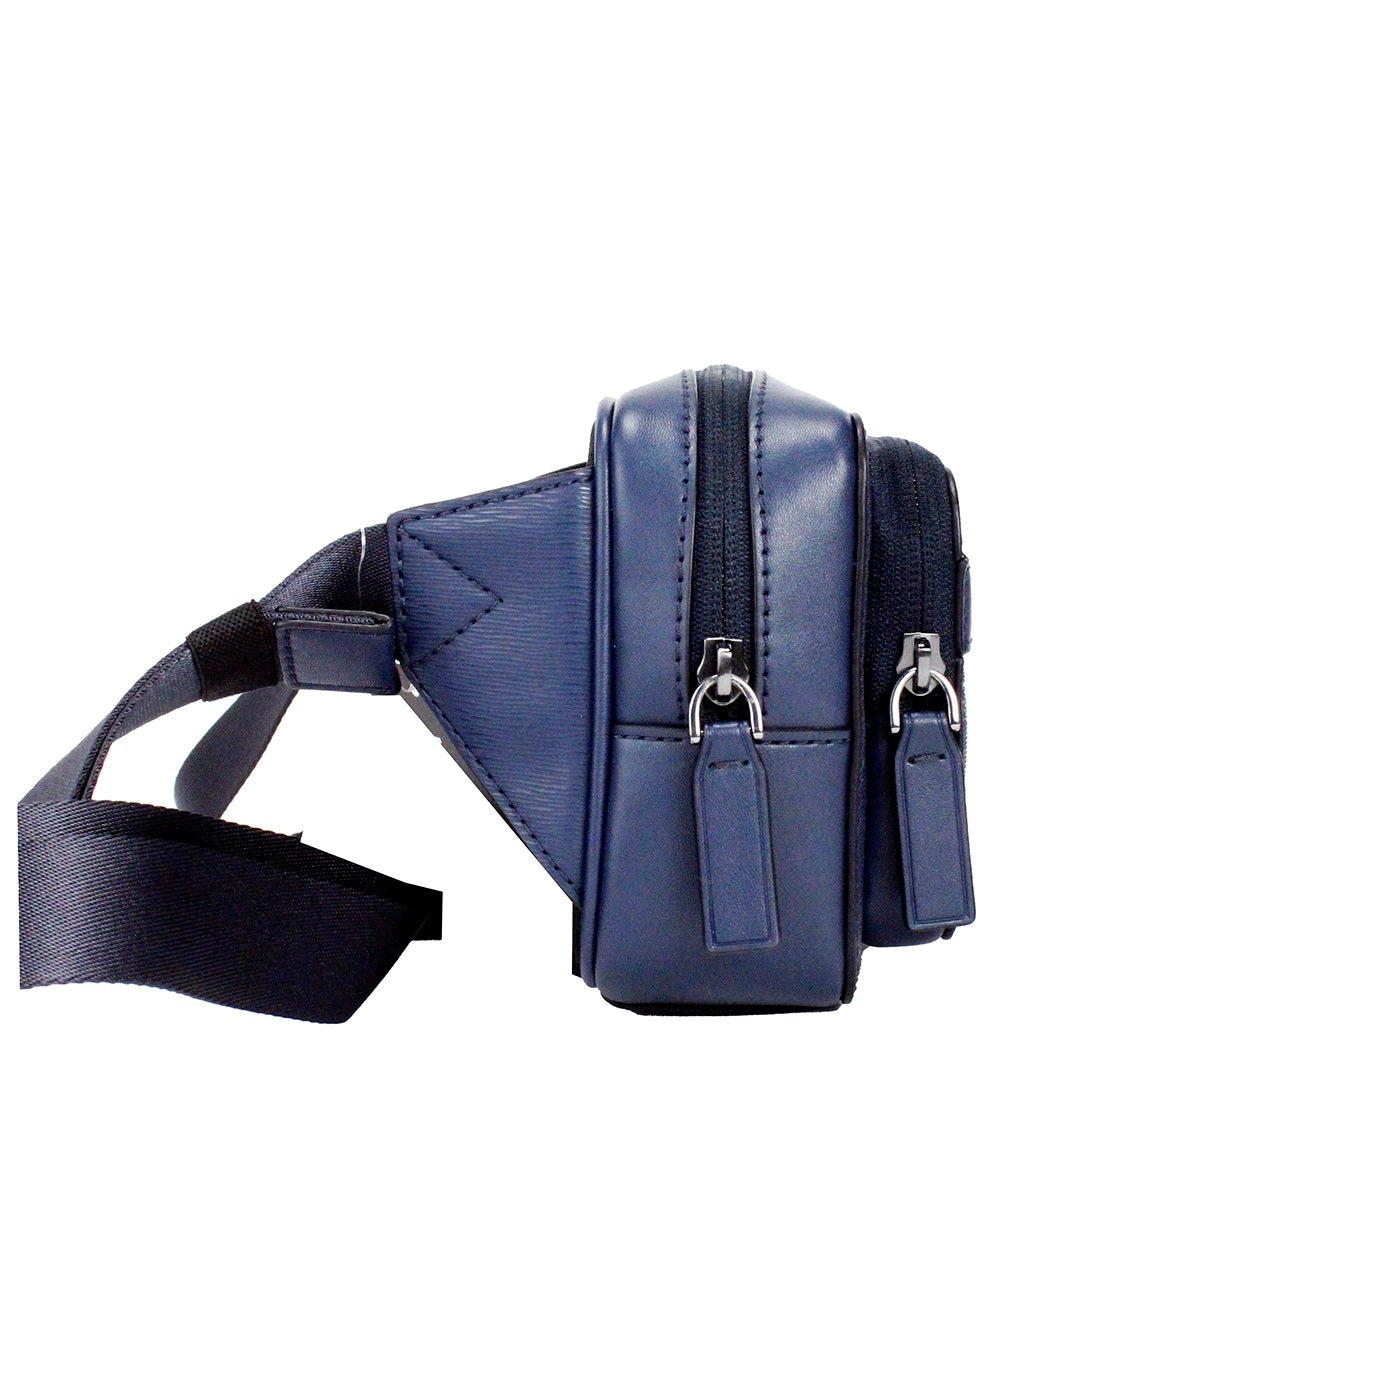 Cooper Small Navy Blue Smooth Leather Double Zip Belt Bag